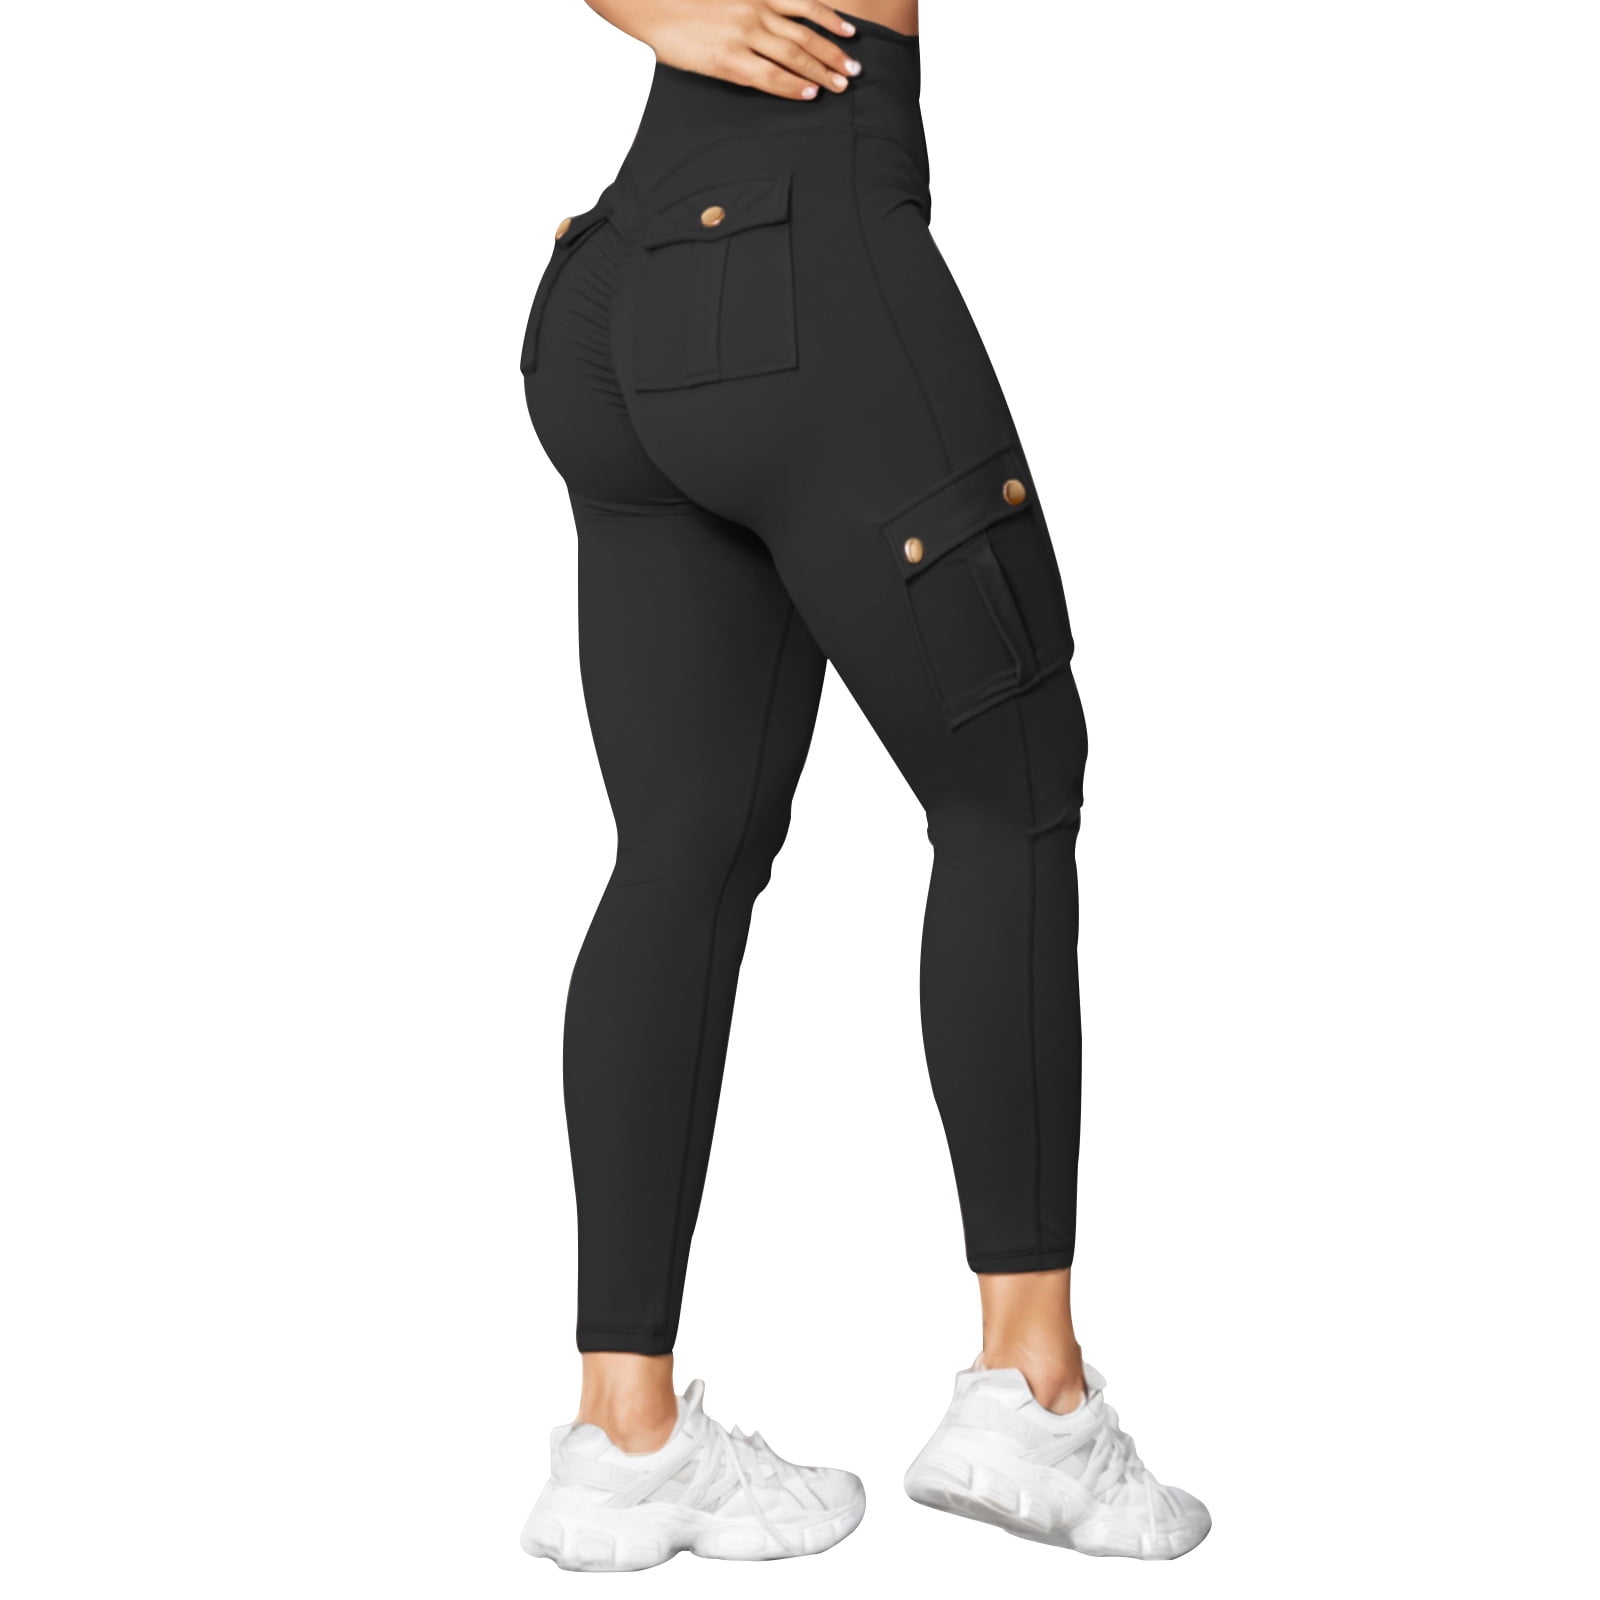 Outfmvch Yoga Pants Women Joggers For Women Nylon,Spandex Relaxed Pull-On  Styling Straight-Leg Lightweight Two Pockets Long Yoga Pants With Pockets